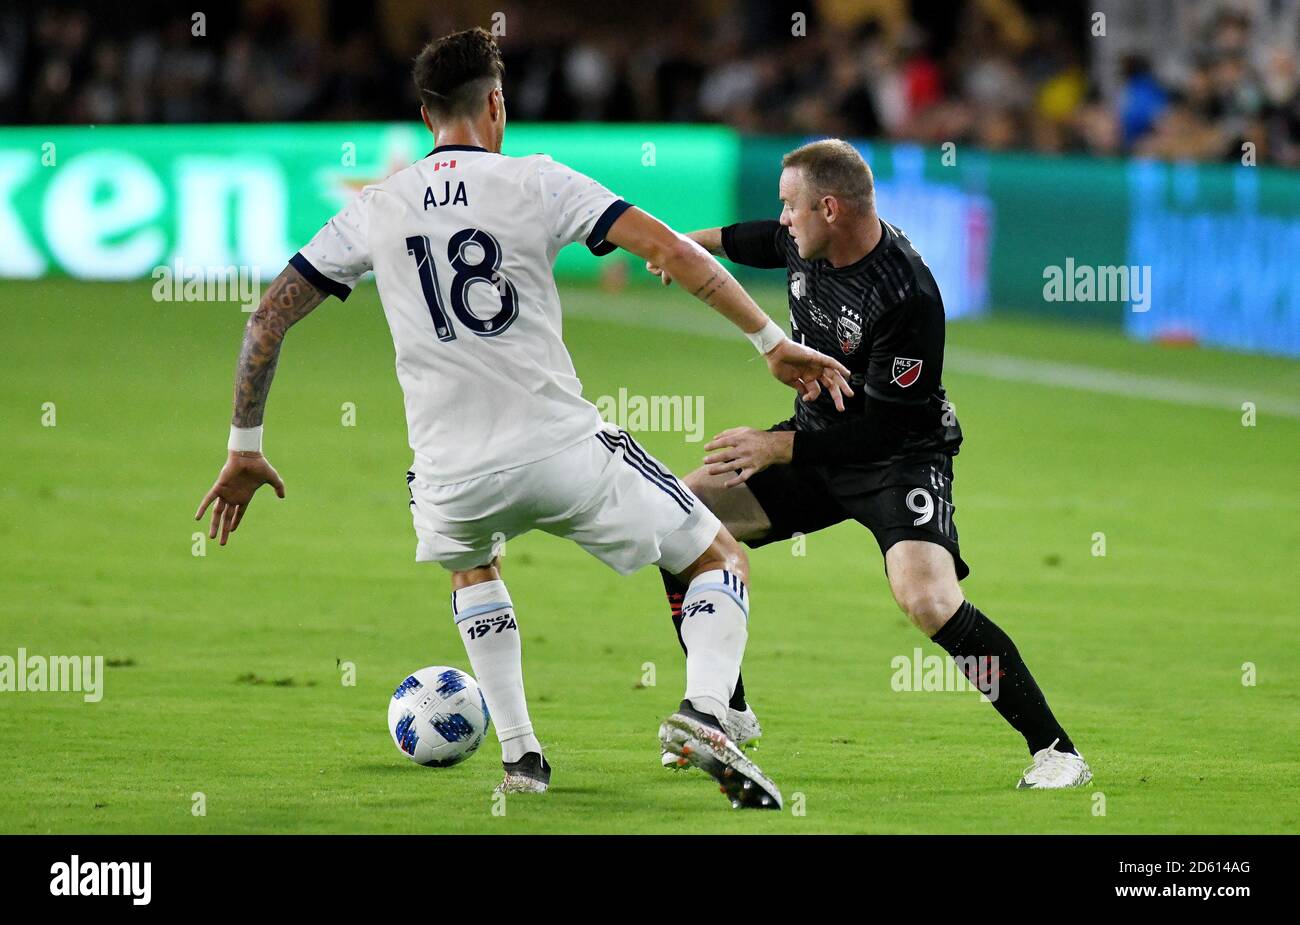 DC United player Wayne Rooney  in action during the Major League Soccer match between D.C. United and Vancouver Whitecaps FC at the Audi Field Stadium on July 14, 2018 in Washington D.C.  Stock Photo